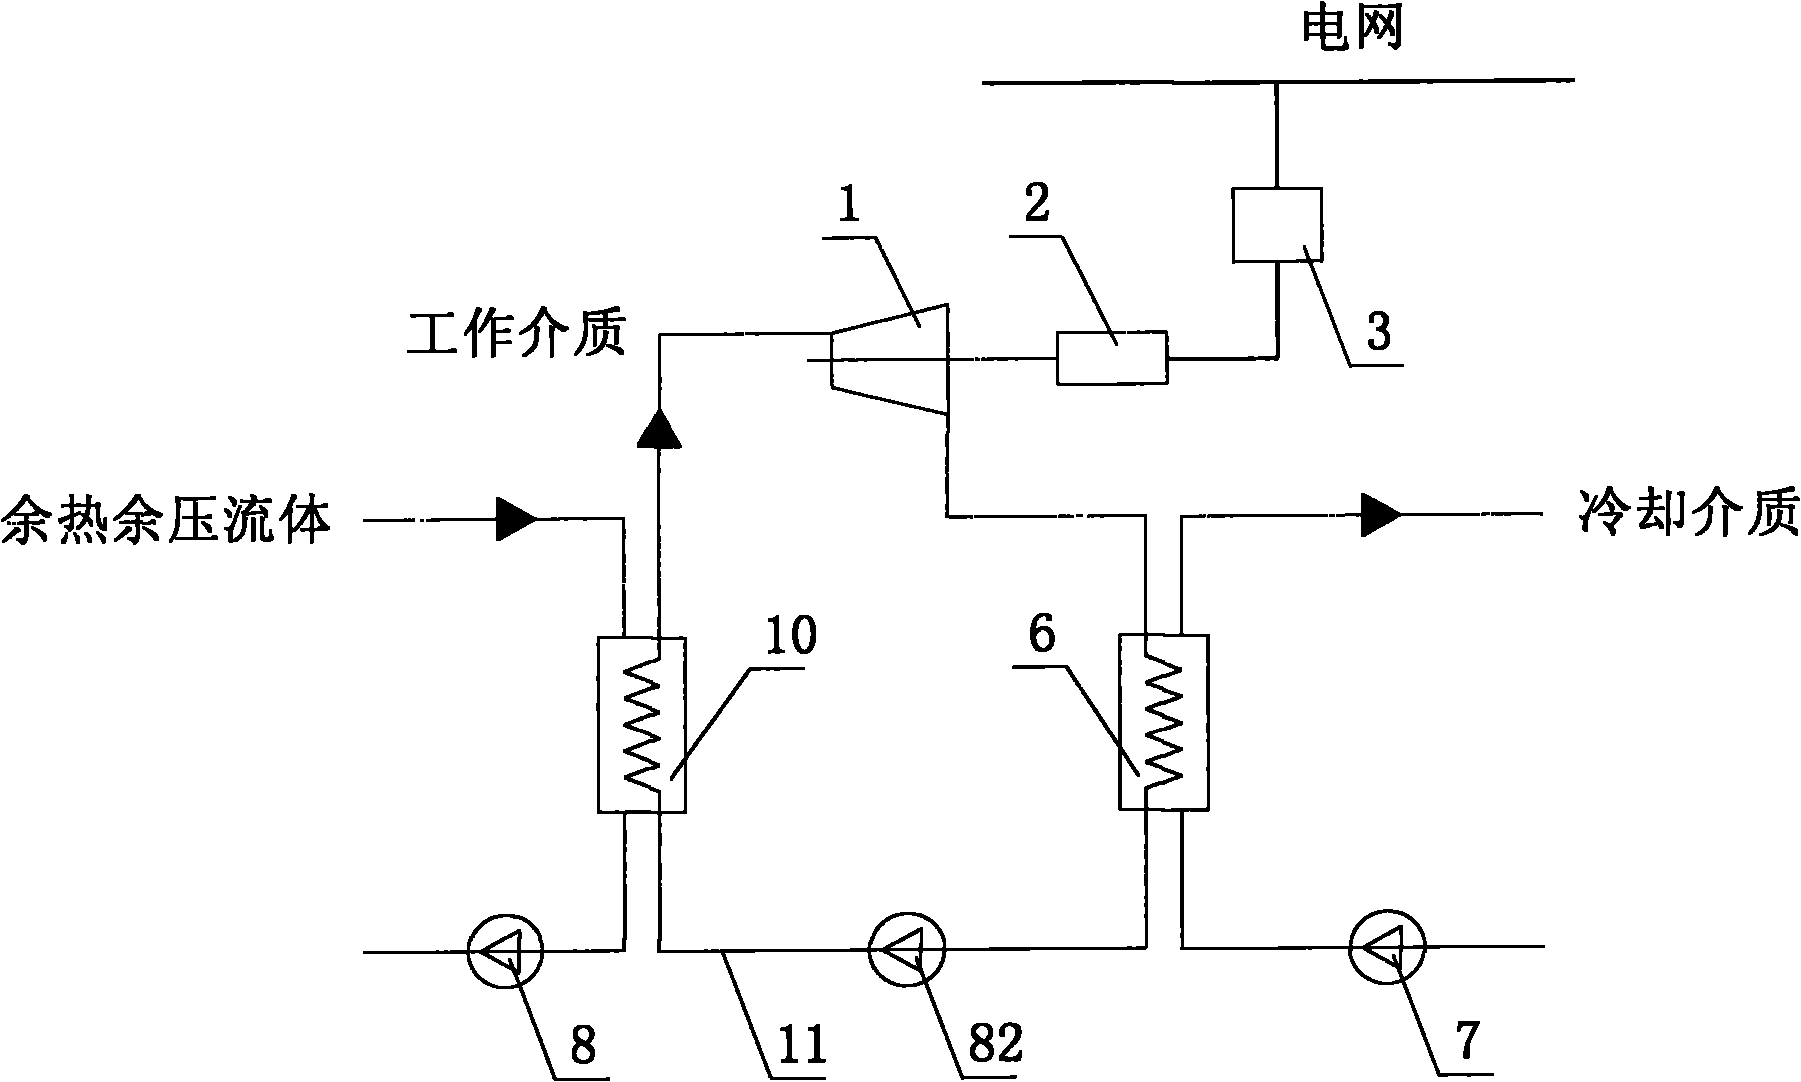 Distributed type residual-heat/residual-pressure power generation system and distributed type residual-heat/residual-pressure power generation method